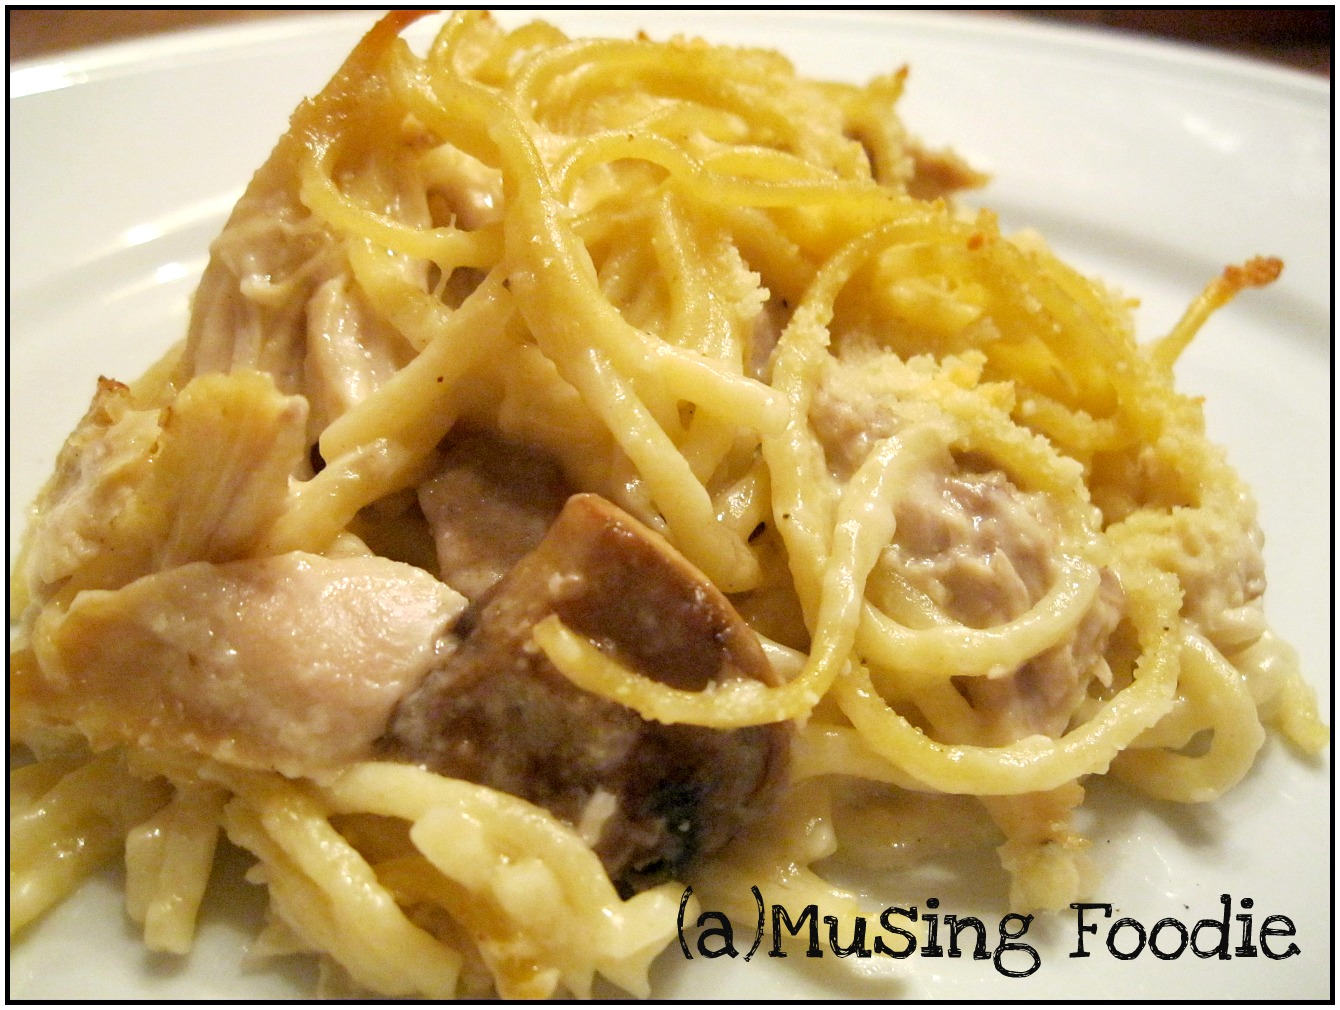 Pioneer Woman's Chicken Spaghetti - (a)Musing Foodie